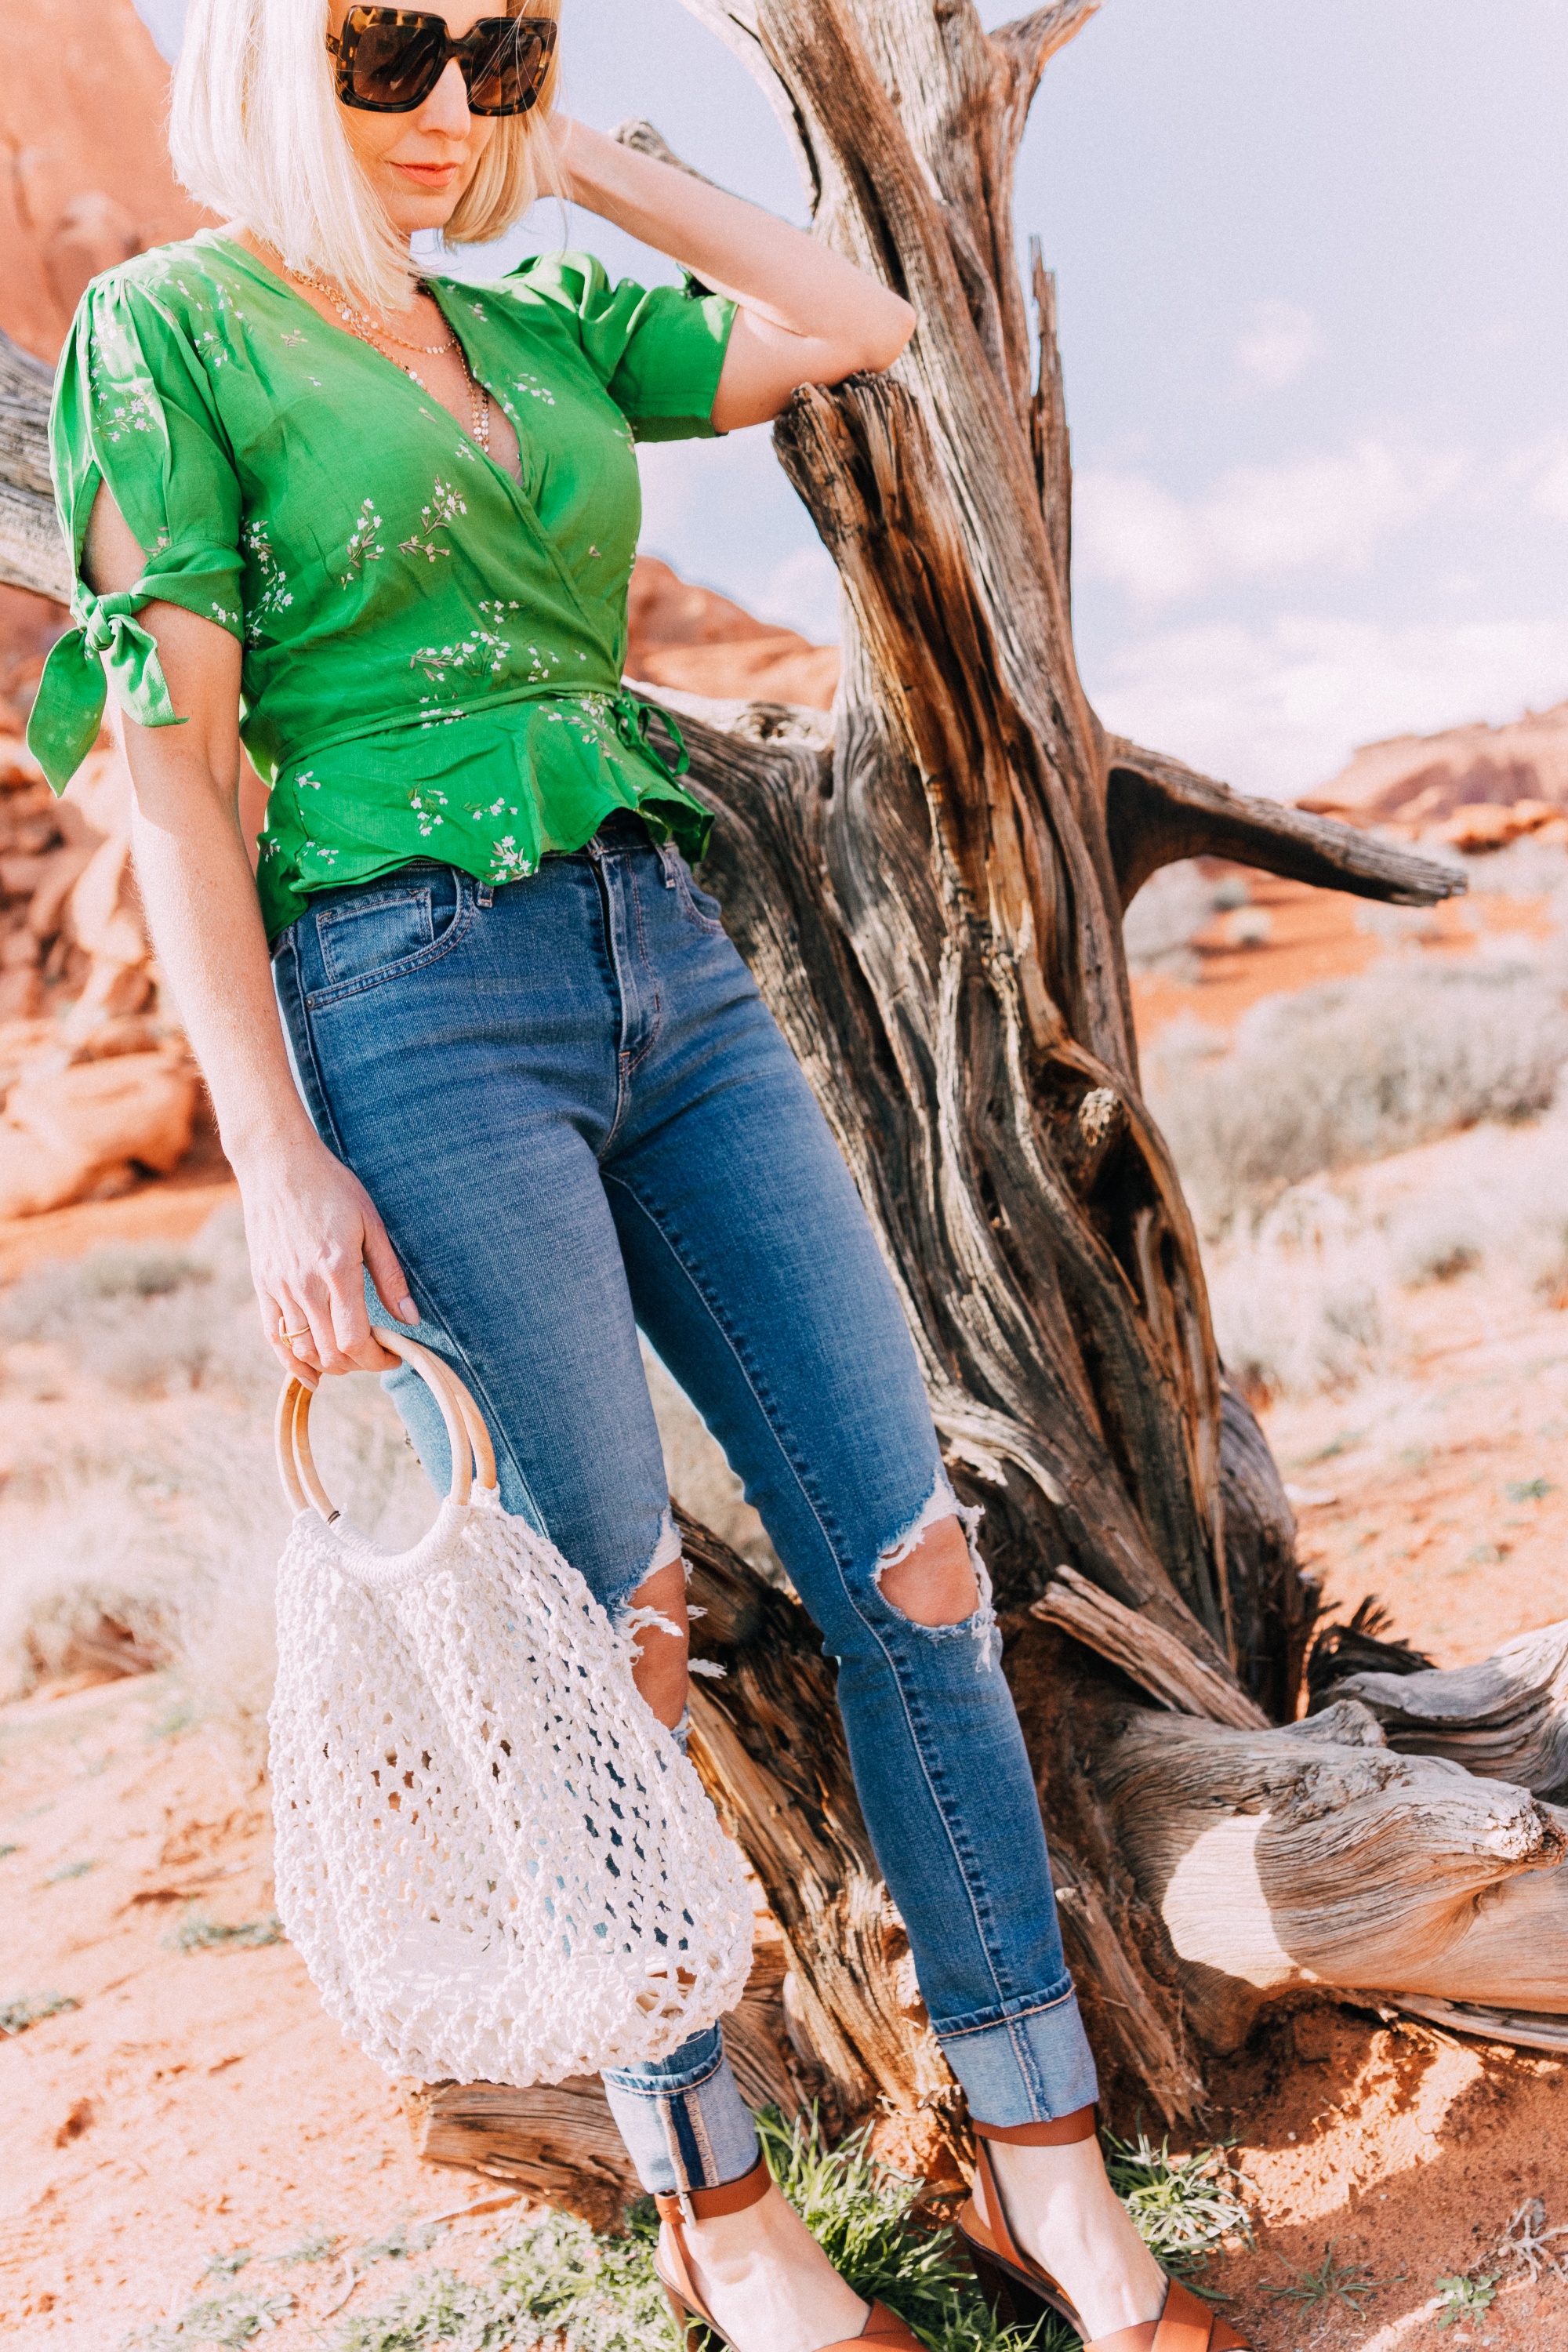 fashion blogger wearing faithfull the brand green lucy wrap top and levi's 721 skinny blue jeans carrying open knit white handbag